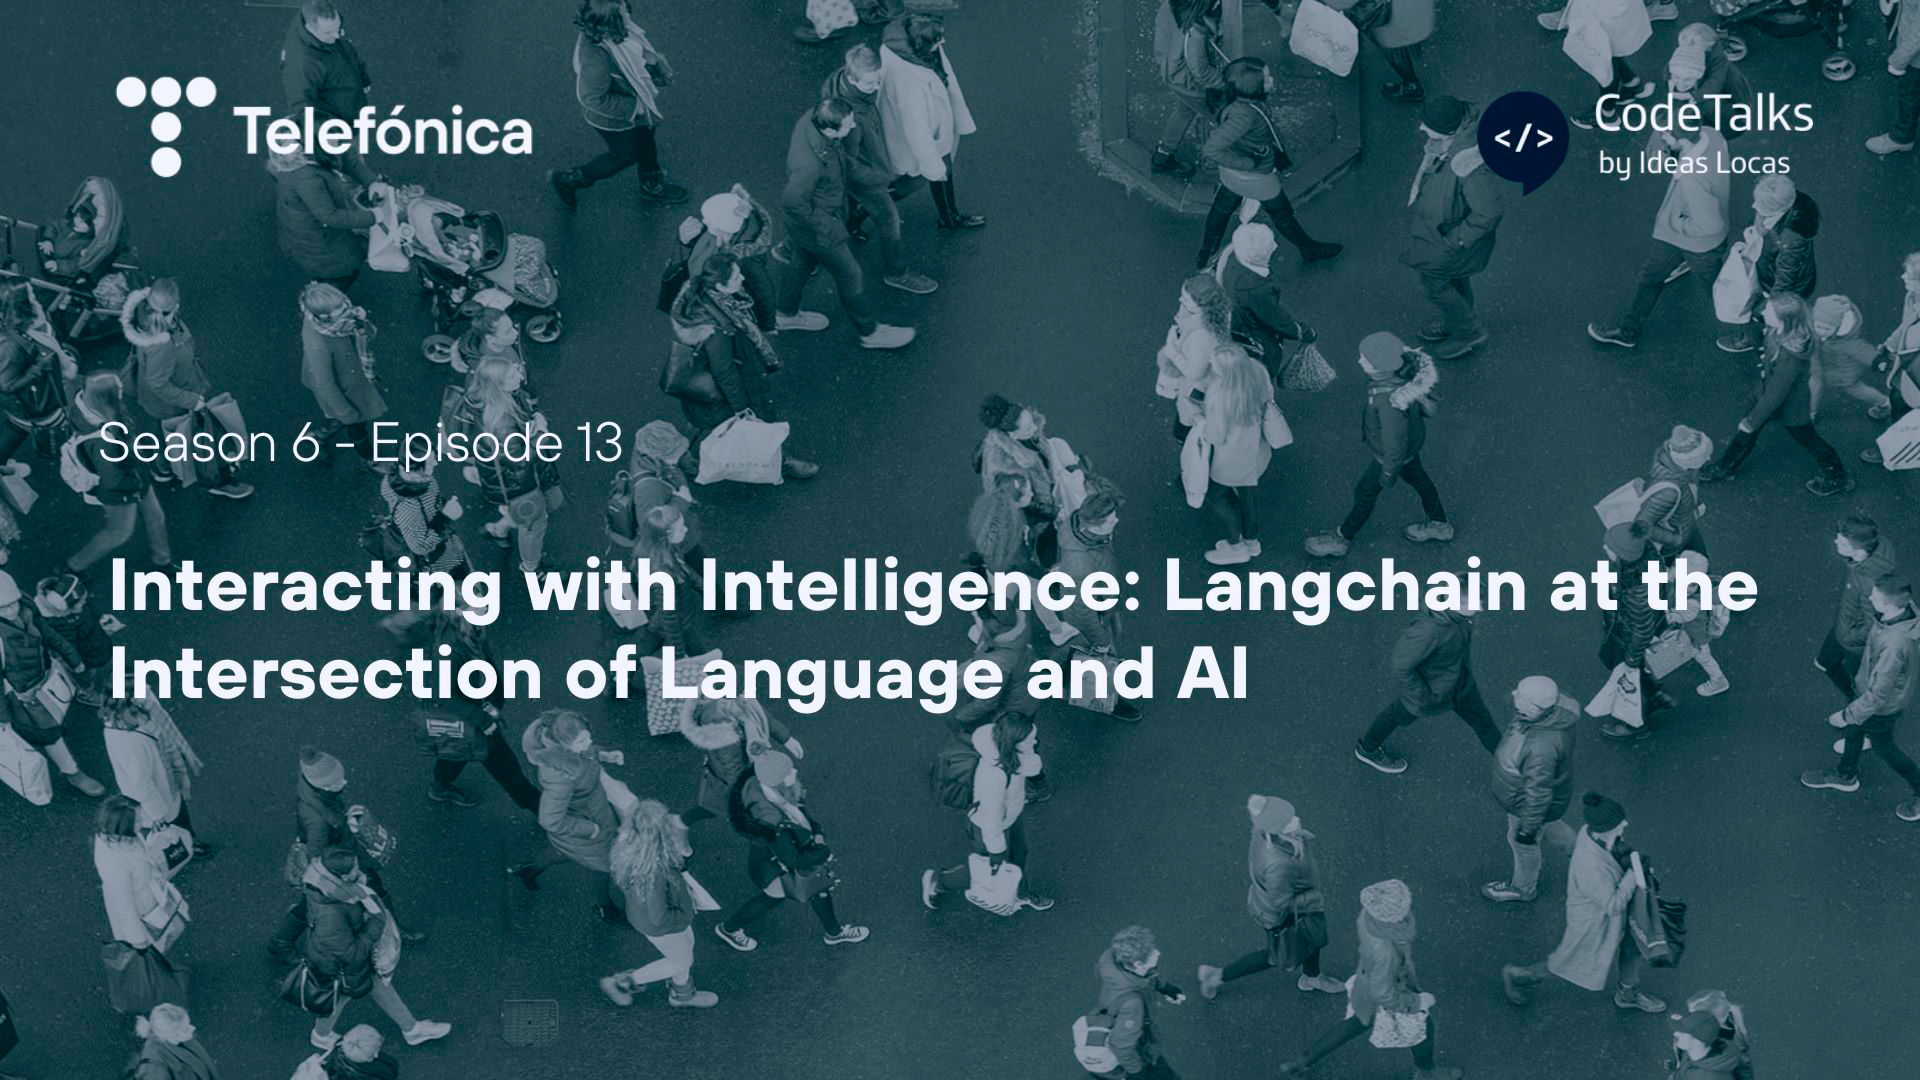 Interacting with Intelligence: Langchain at the Intersection of Language and AI